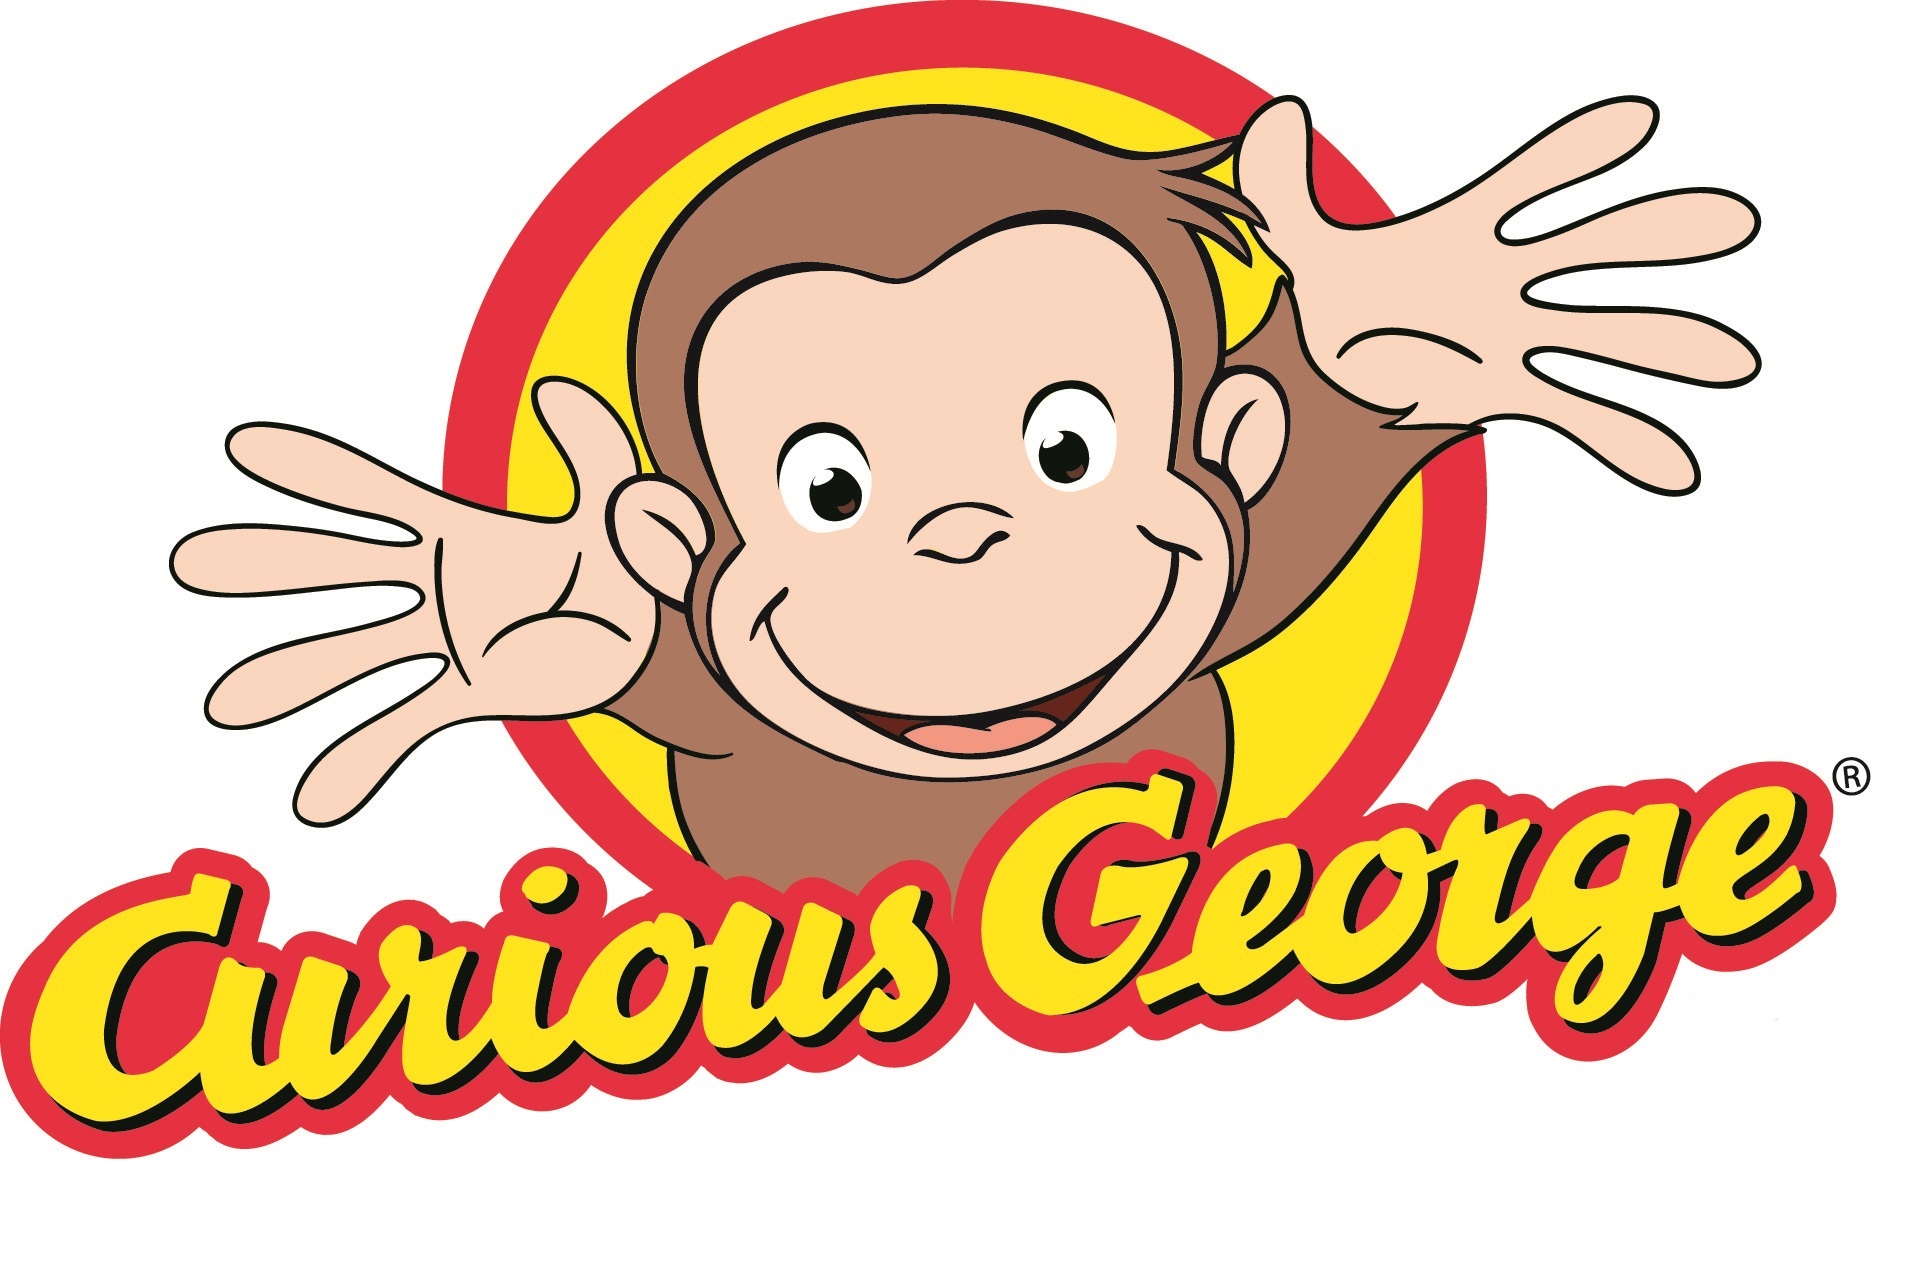 curious george pdf free download